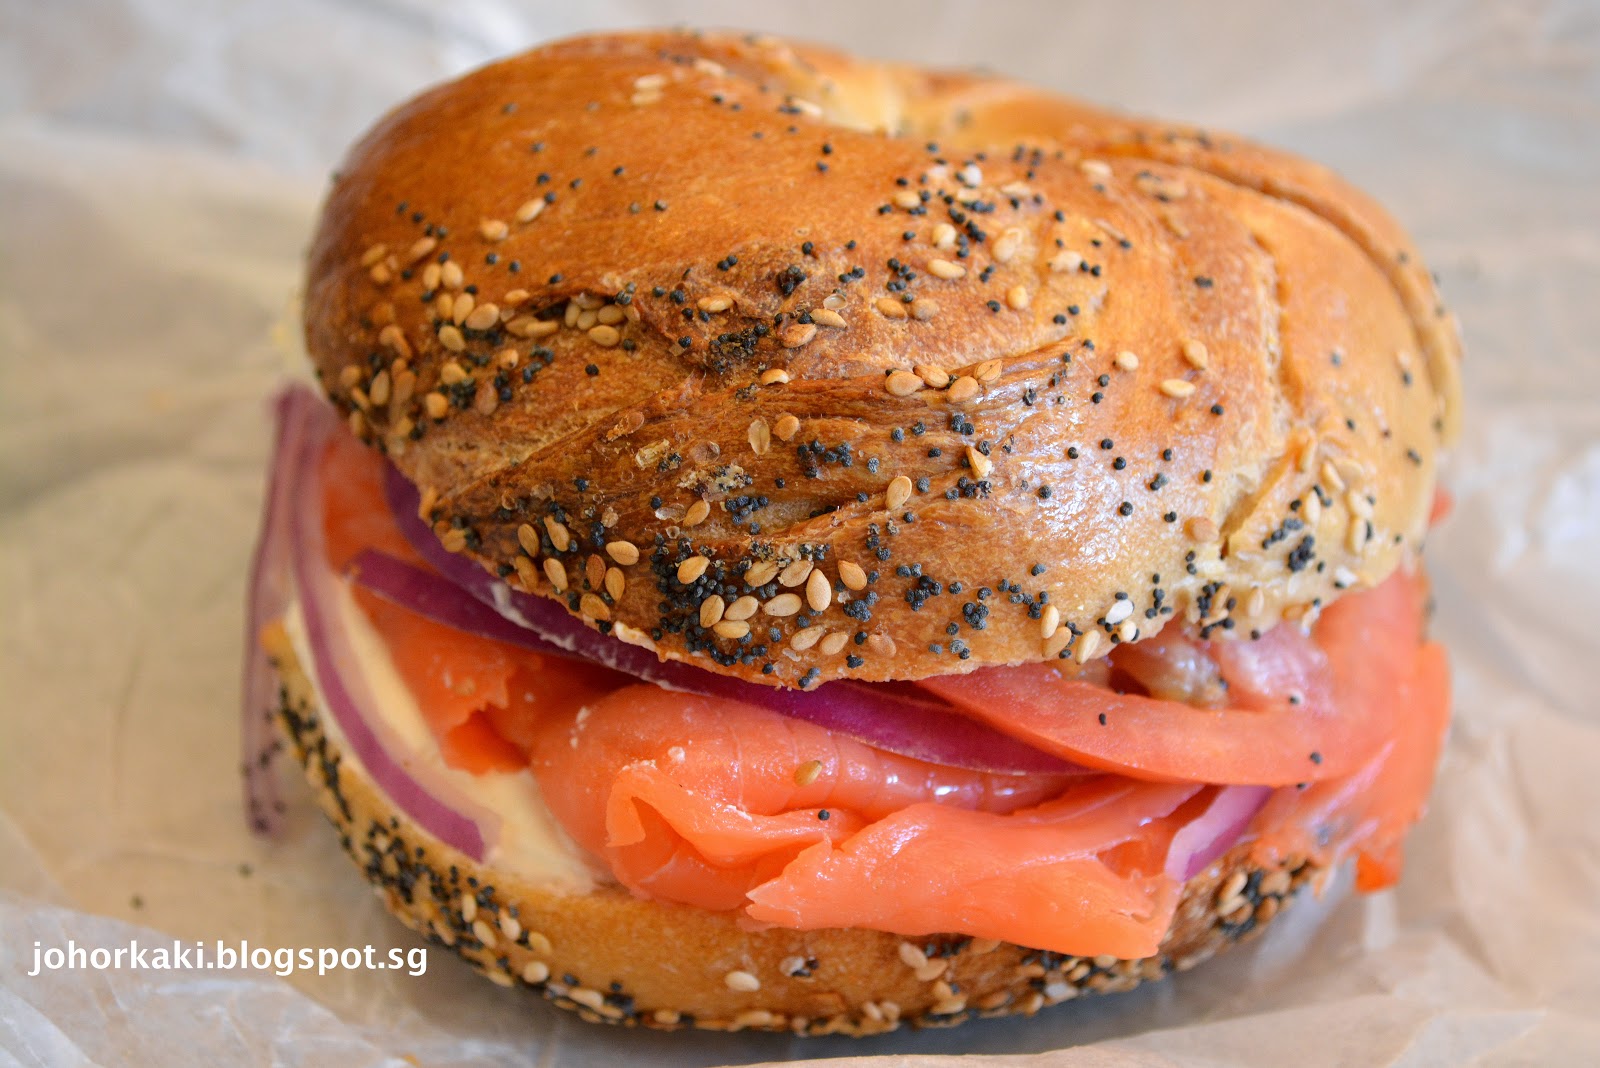 Ess A Bagel In Nyc New York Tony Johor Kaki Travels For Food Heritage Culture Diplomacy